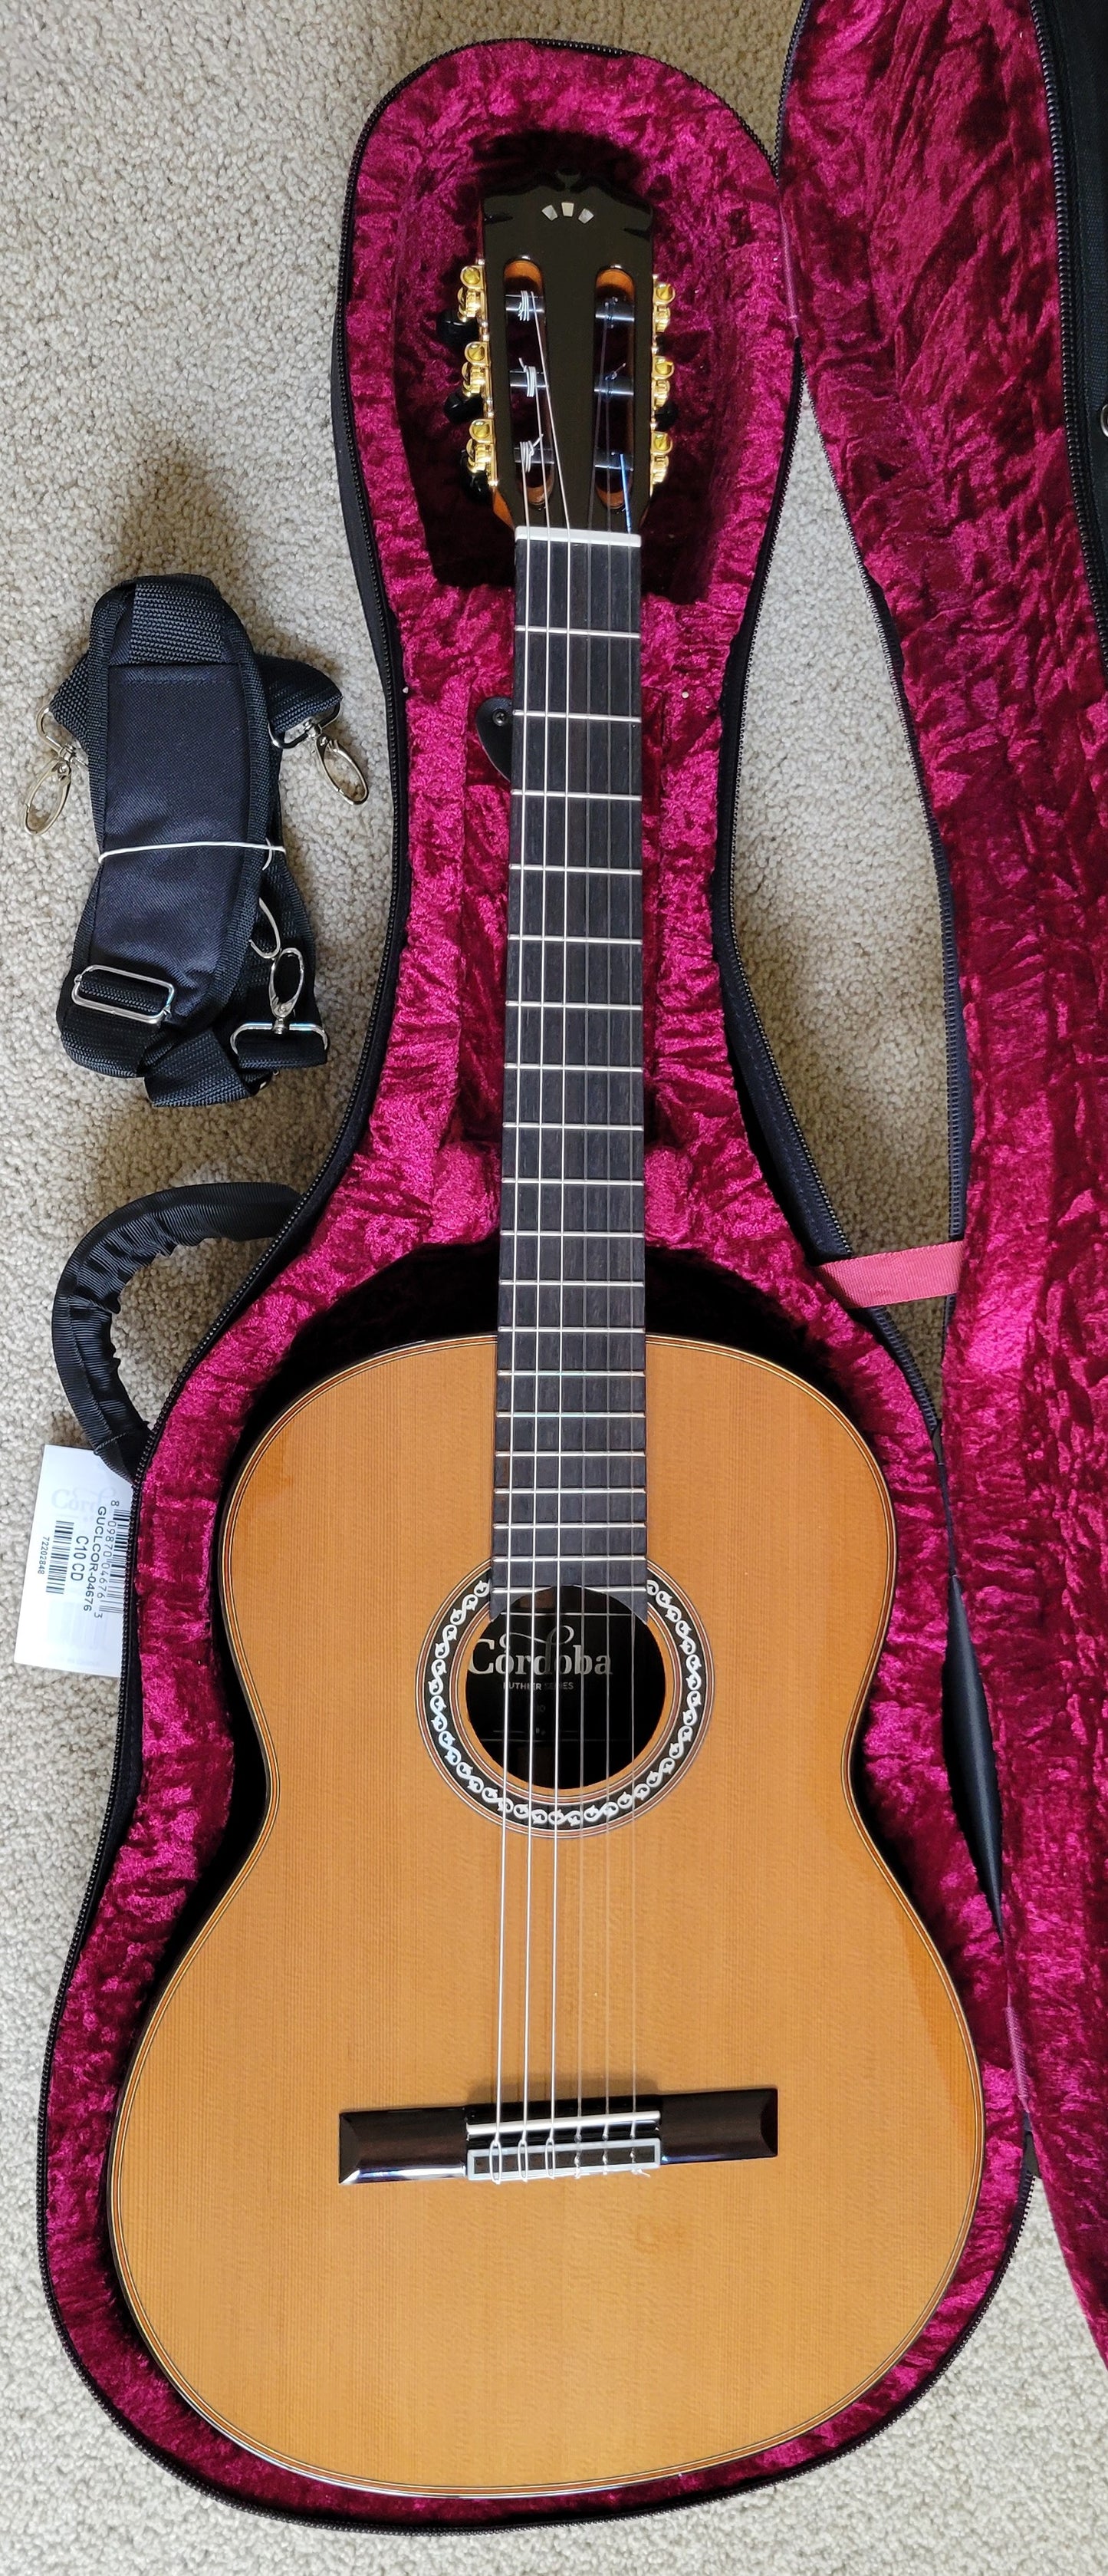 New Cordoba C10 CD Spanish Classical Traditional Acoustic Guitar, Polyfoam Case